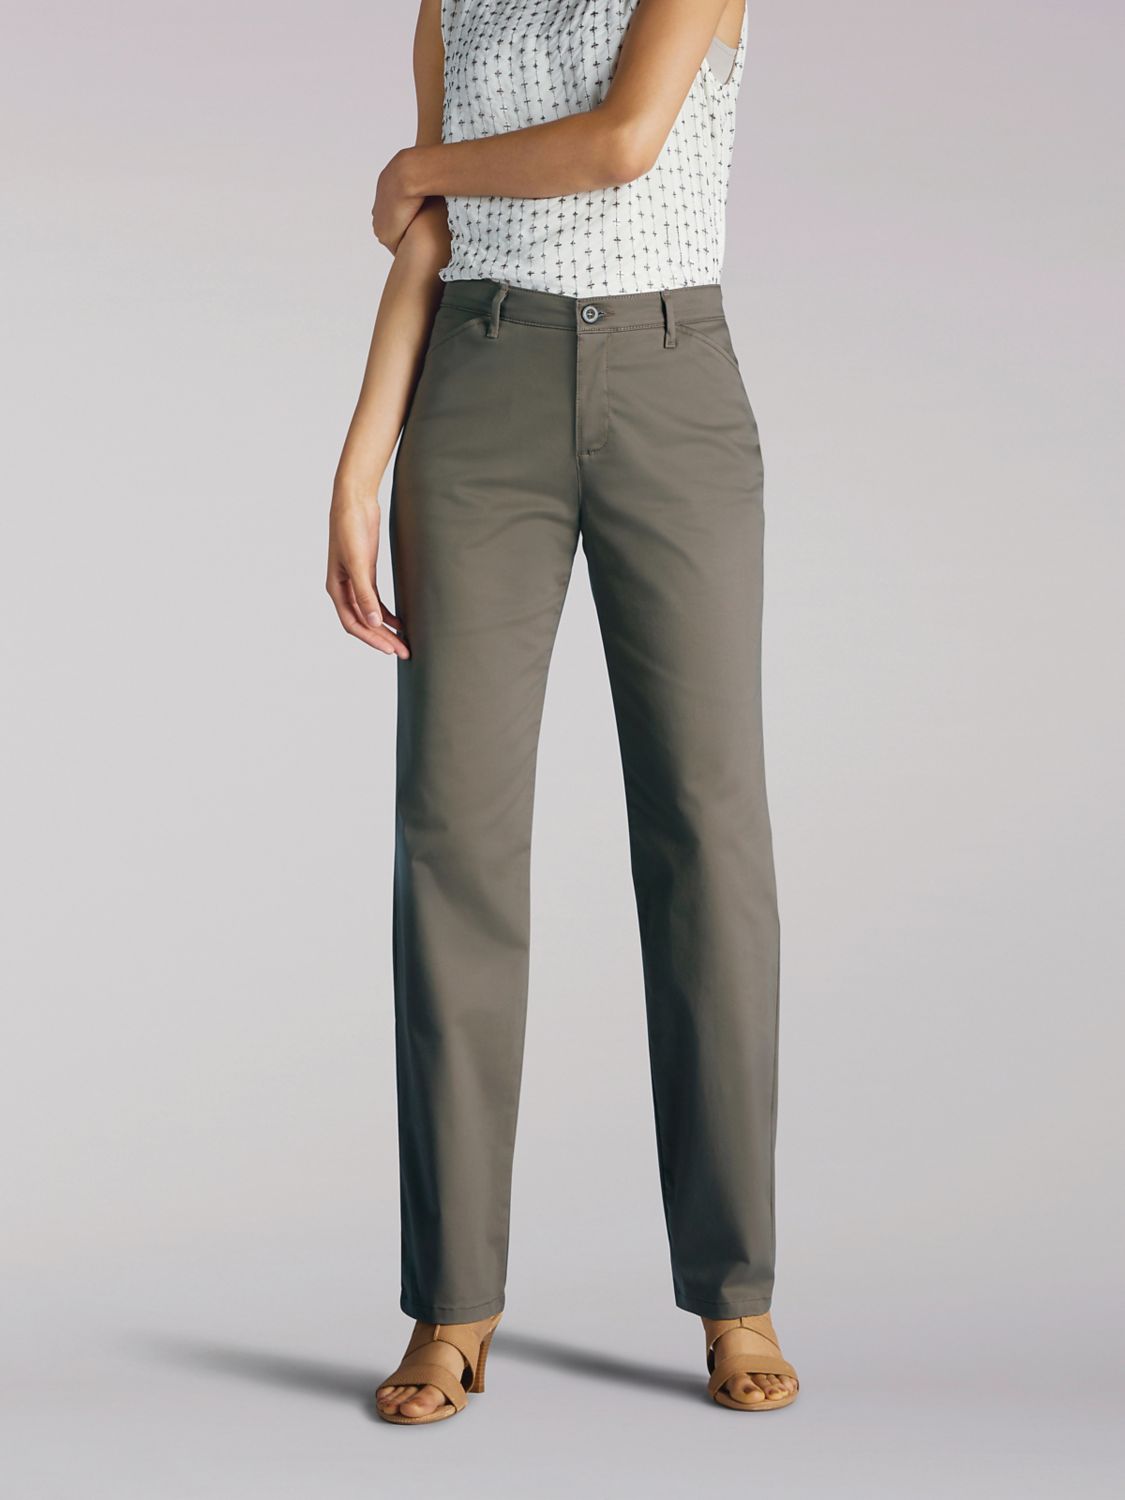 Women's Relaxed Fit Straight Leg Pant All Day Pant (Plus)